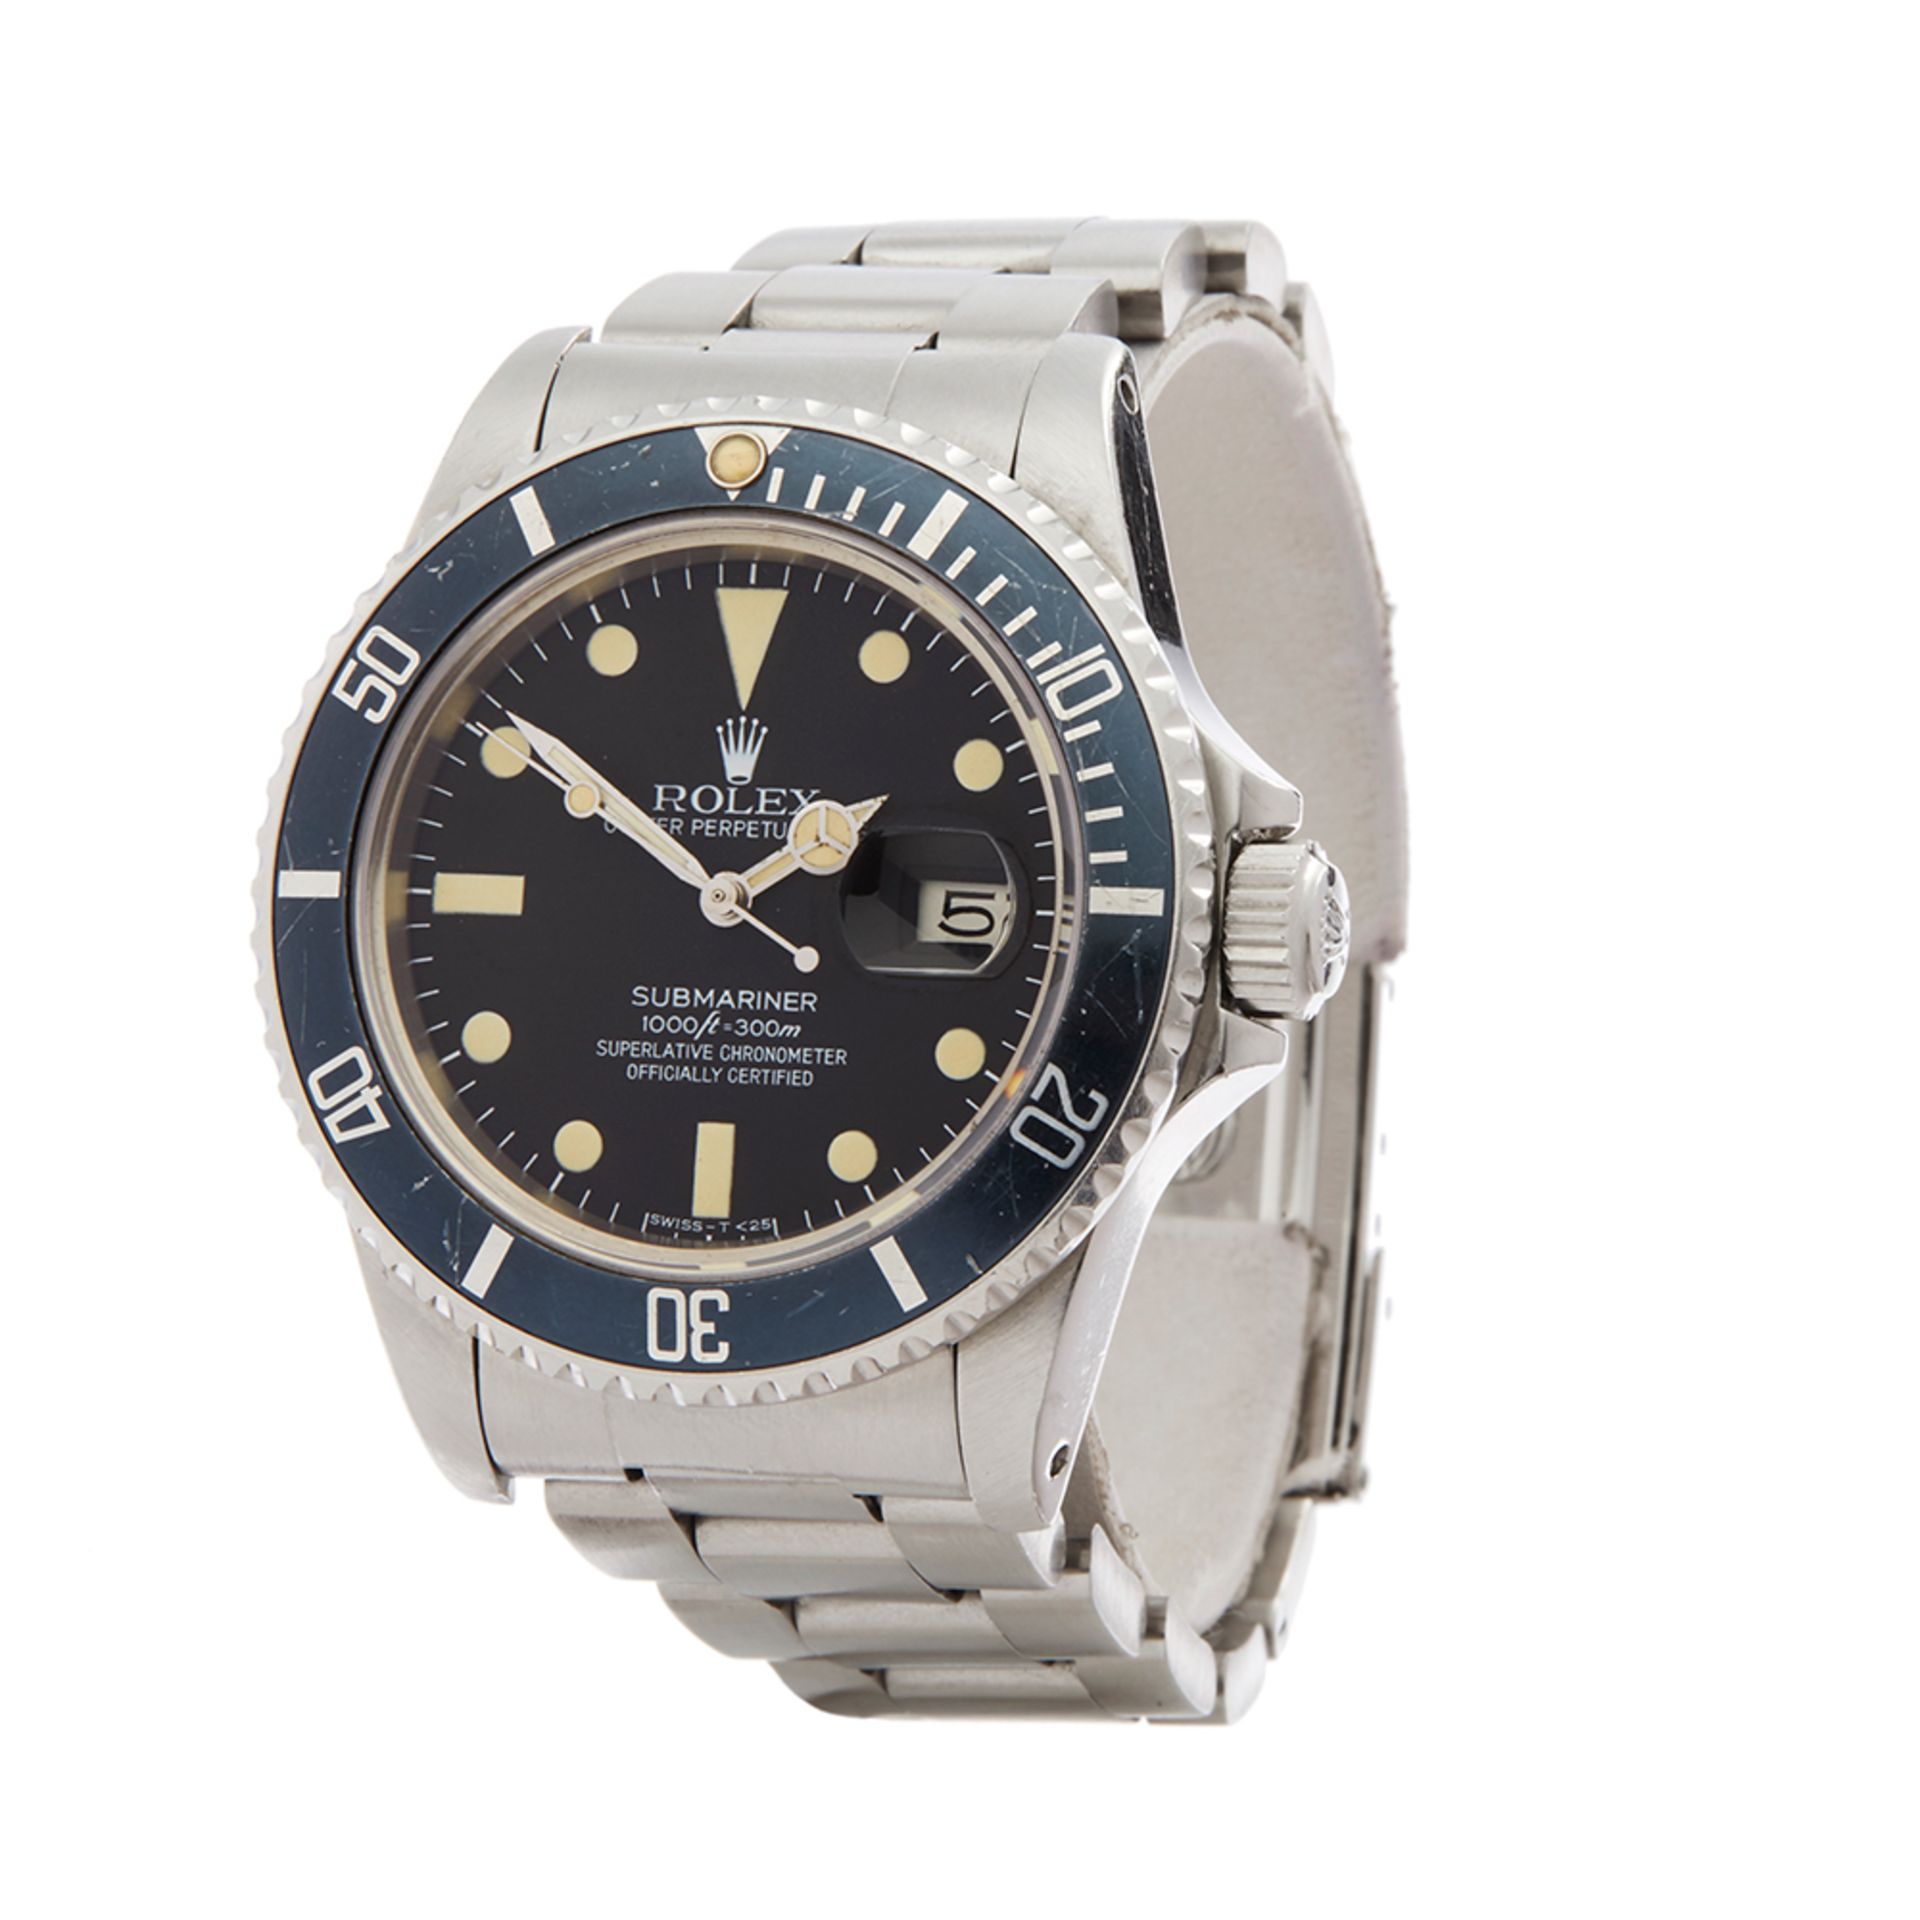 Submariner Stainless Steel - 16800 - Image 3 of 7